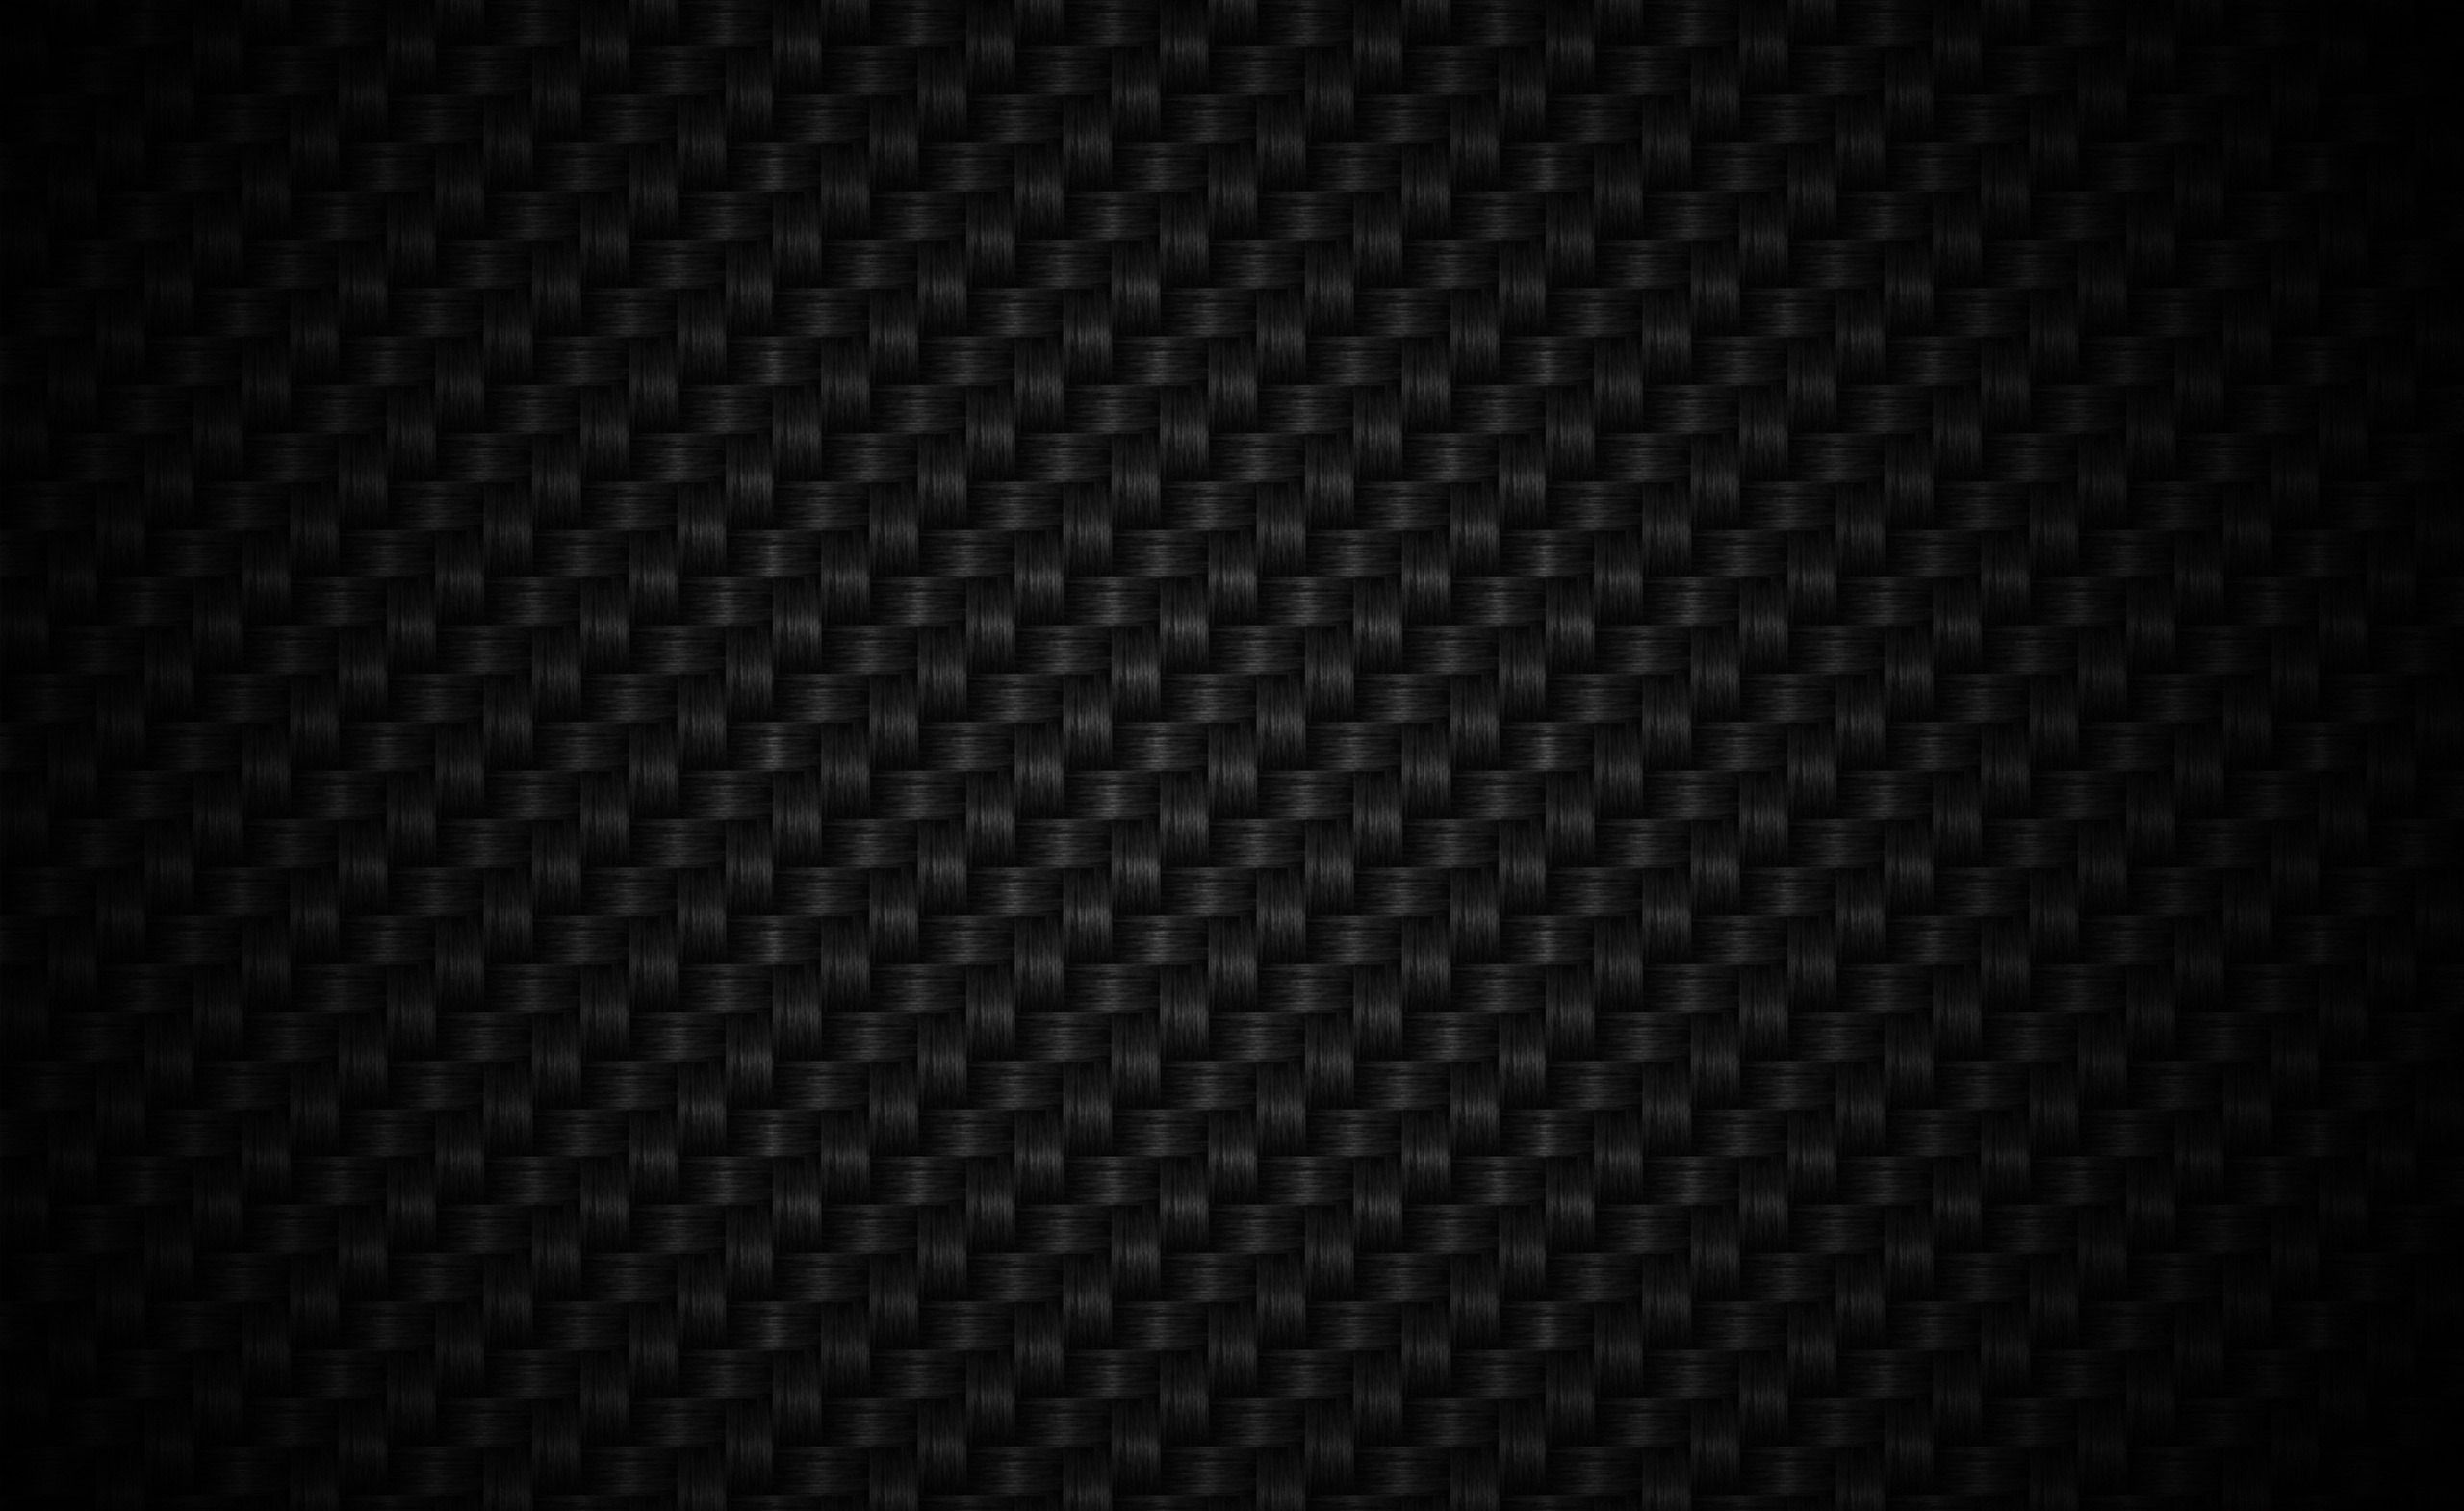 Top Patterns Textures 1920x1080 Images for Pinterest